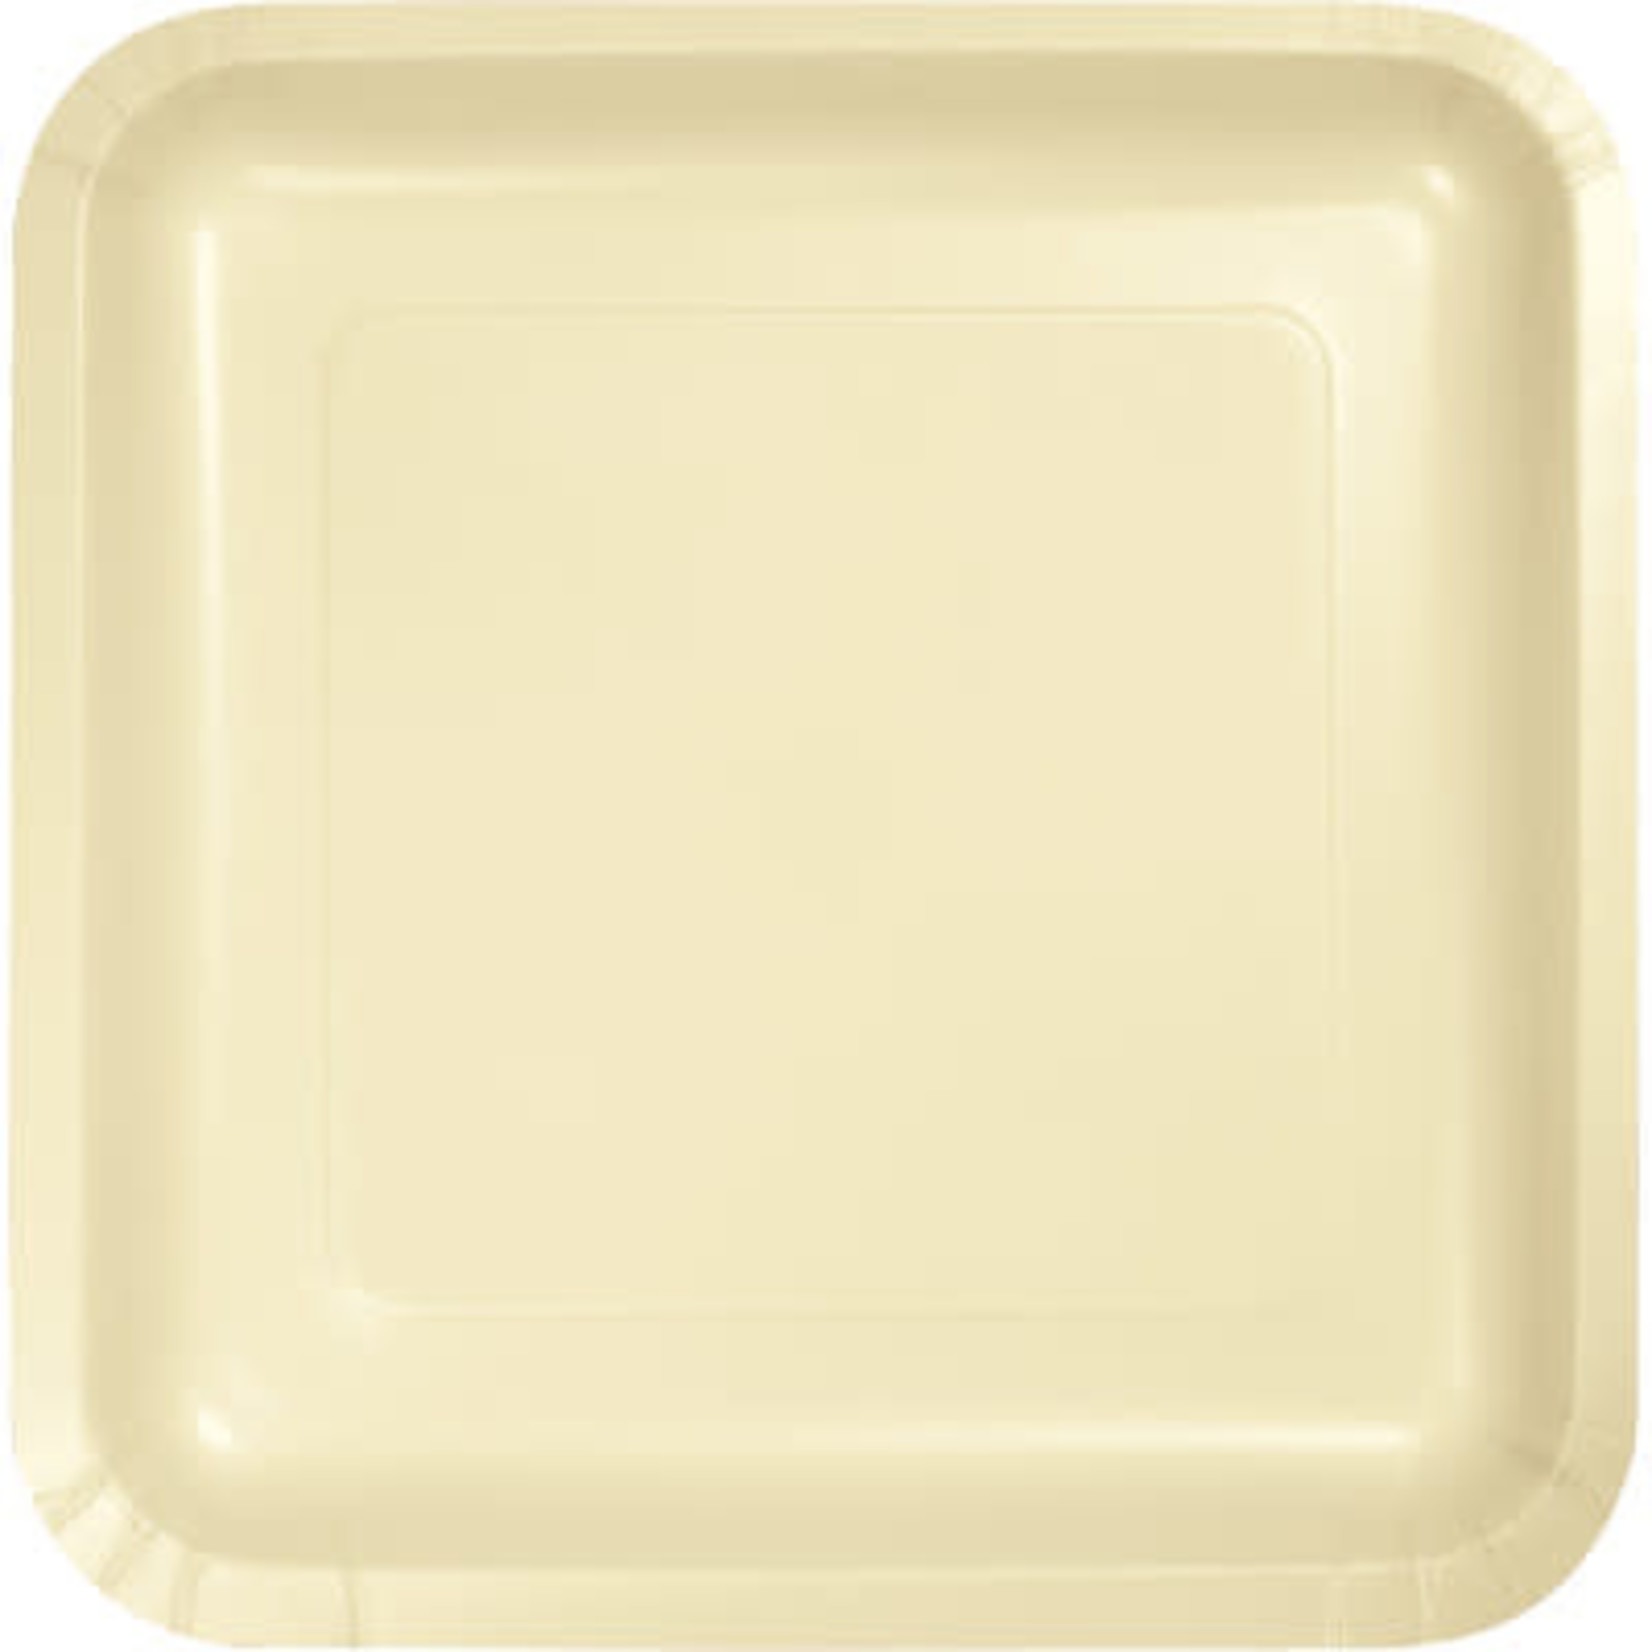 Touch of Color 7" Ivory Square Plates - 18ct.